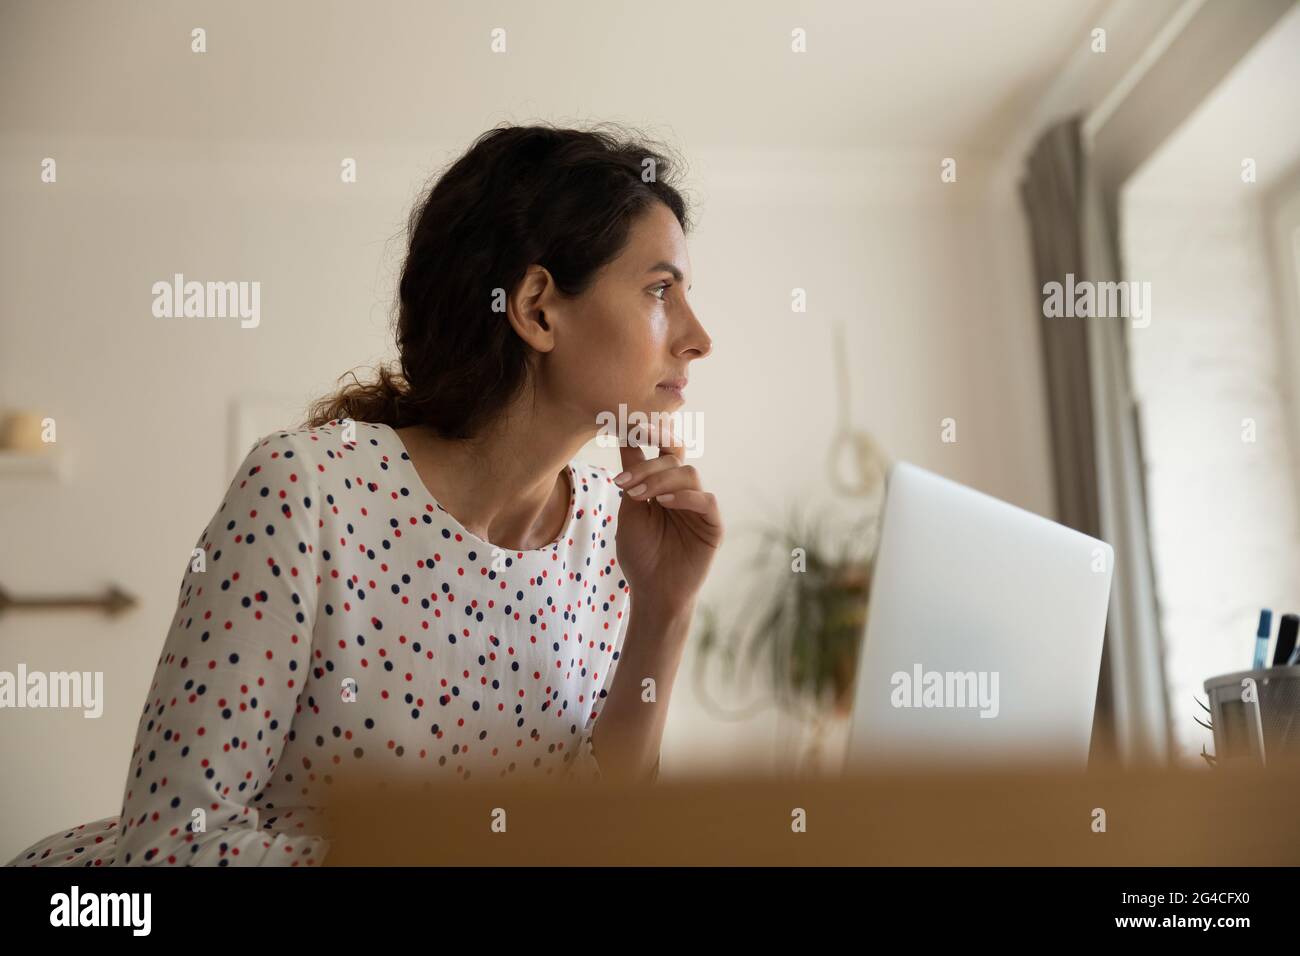 Thoughtful businesswoman touching chin, pondering business project, using laptop Stock Photo